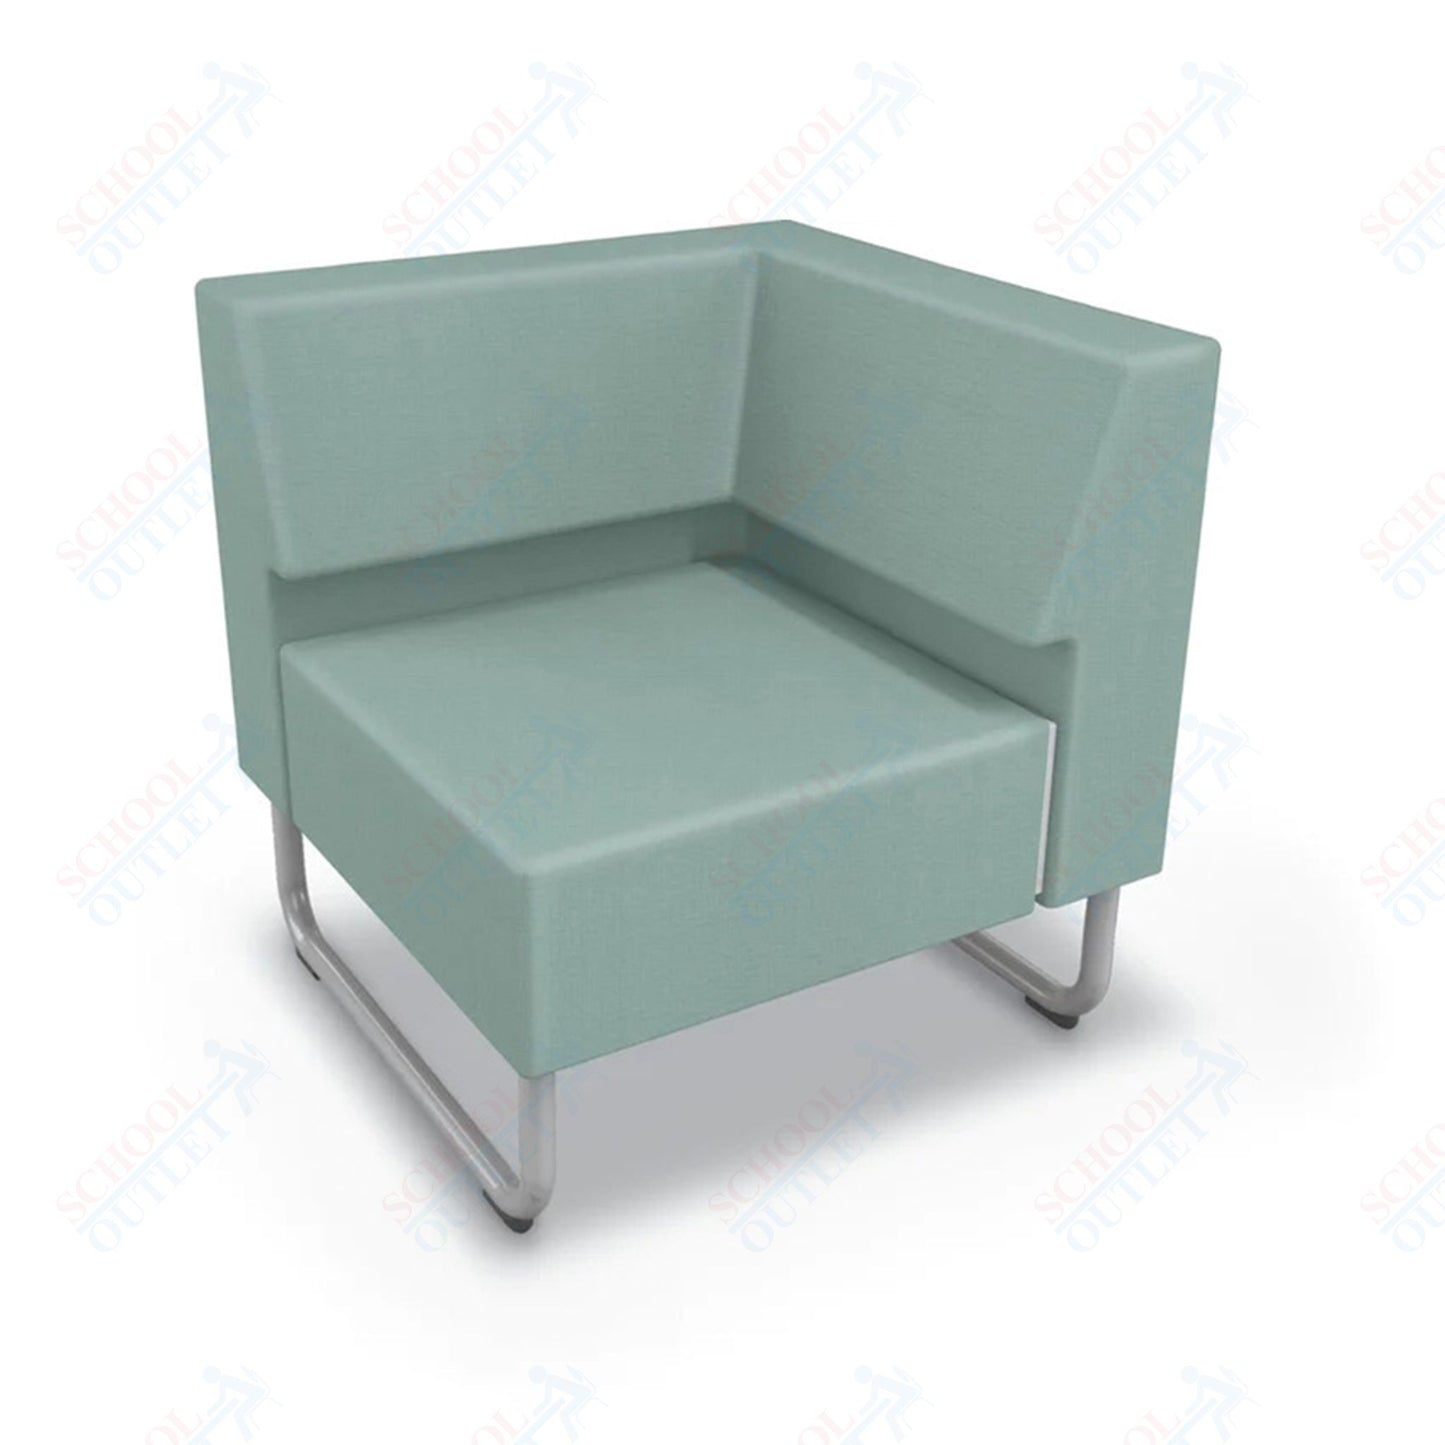 Mooreco Akt Soft Seating Lounge Corner Chair - Grade 02 Fabric and Powder Coated Sled Legs